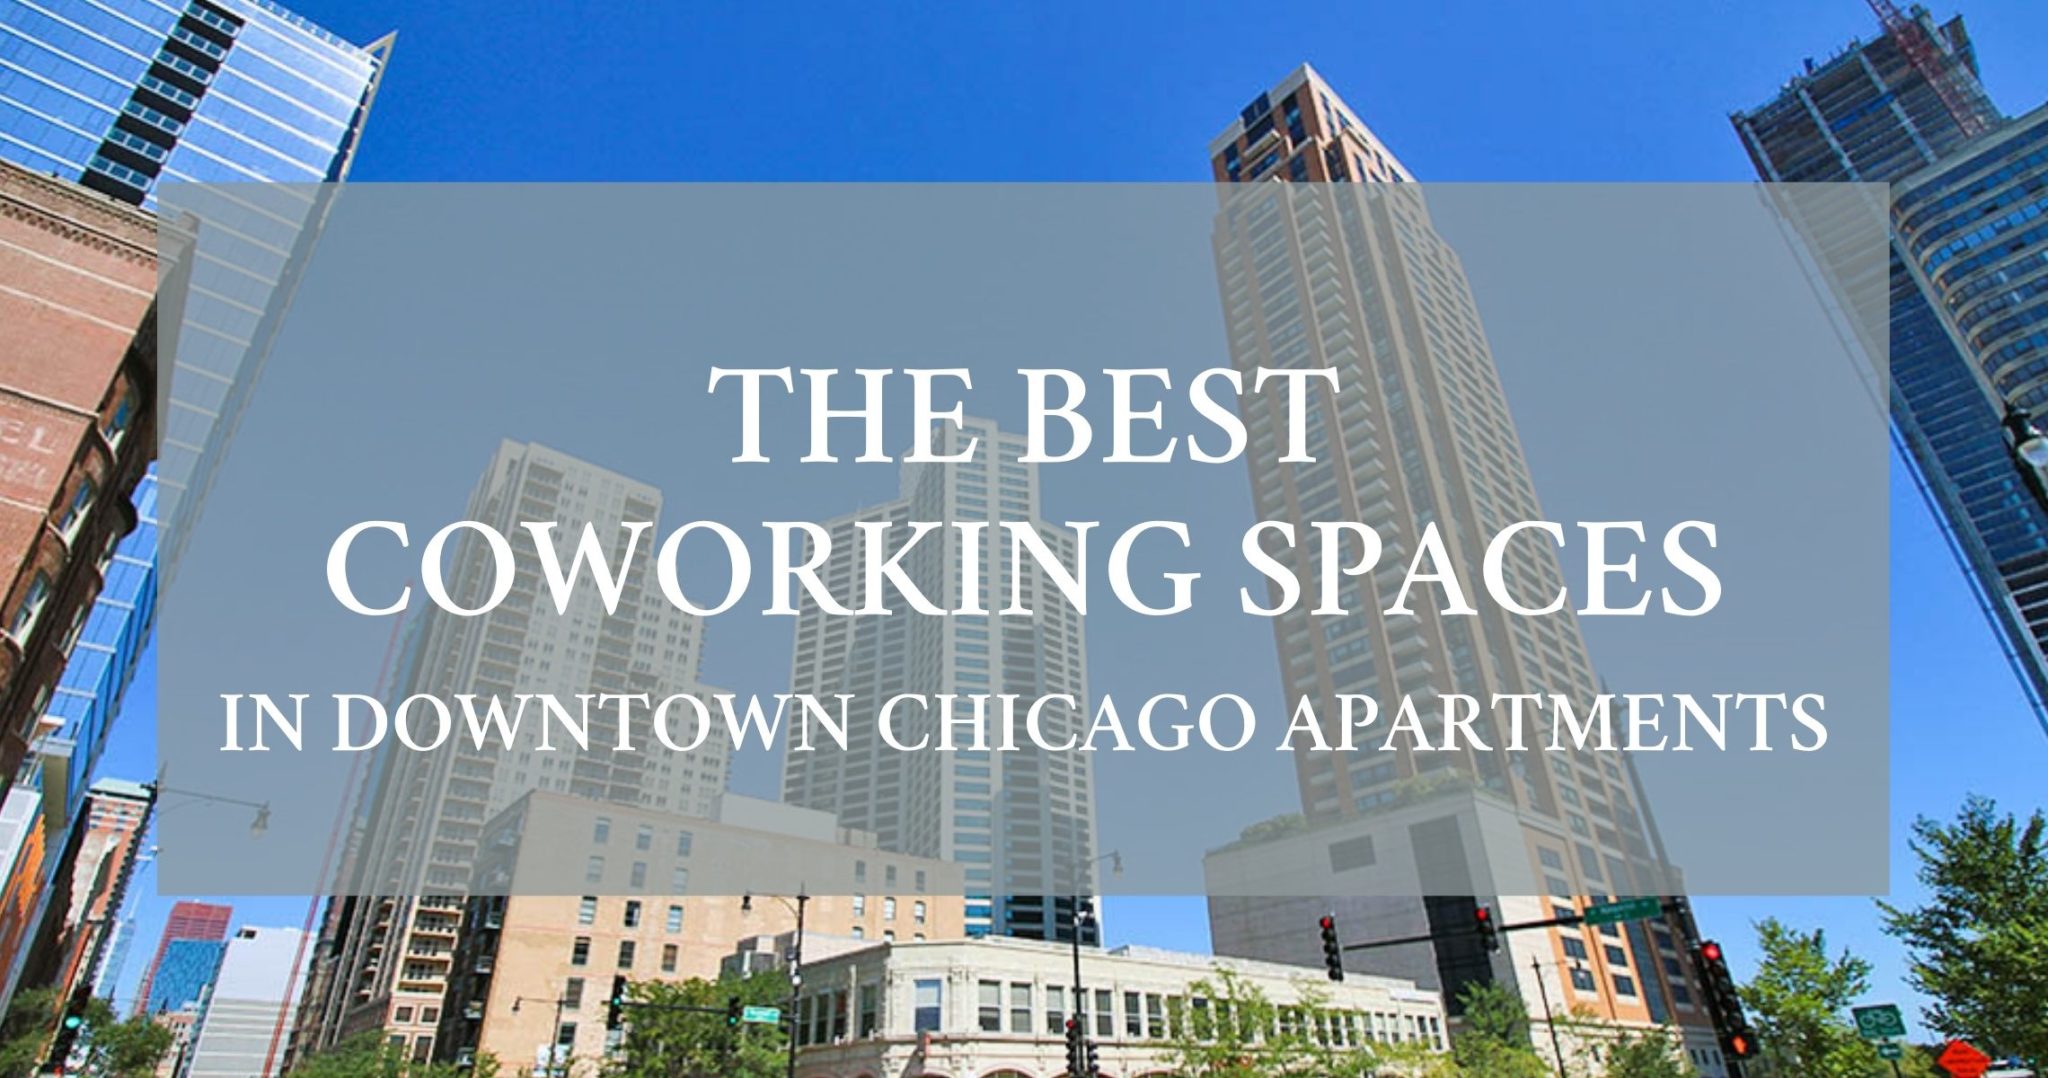 The best coworking spaces in downtown Chicago apartments.